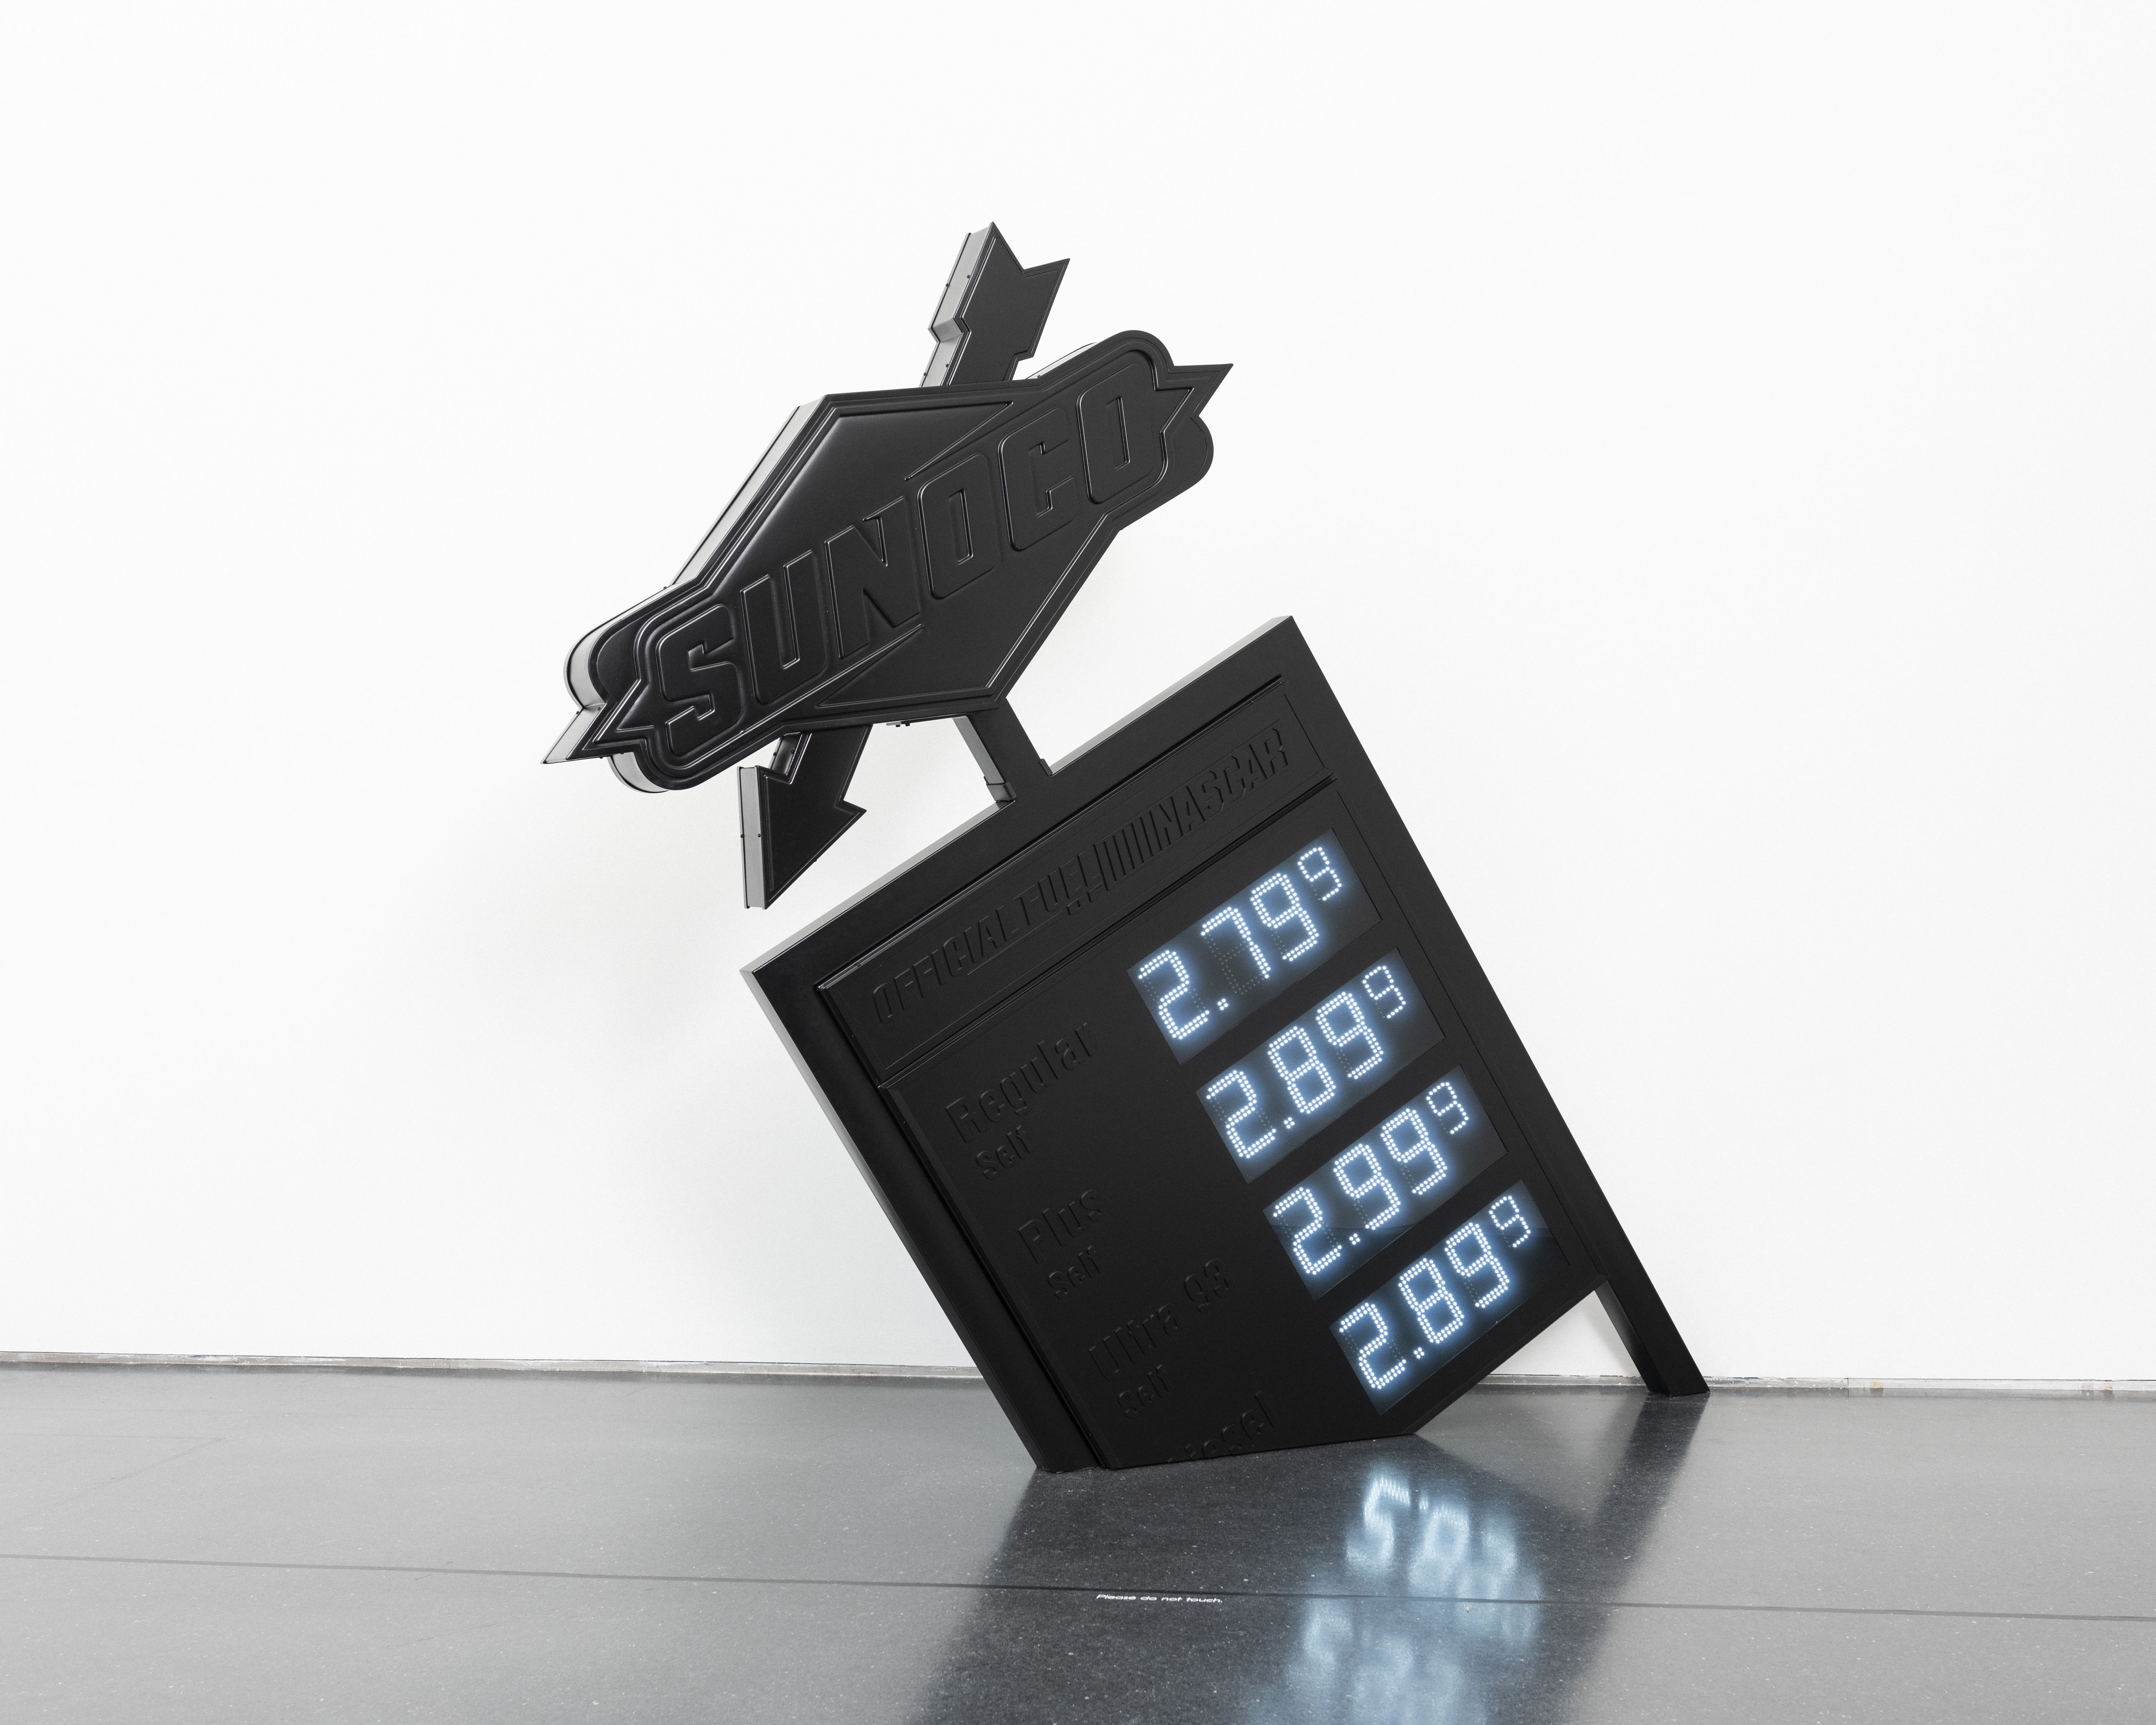 Virgil Abloh (Rockford, Illinois, 1980–2021, Chicago, Illinois). ‘dollar a gallon’ II, 2019. Mixed media, 11ft 2 1⁄2in by 68.75in by 19.5in (341.63 by 174.63 by 49.53cm). Courtesy of Gymnastics Art Institute & Virgil Abloh Securities. Photo: © Gymnastics Art Institute